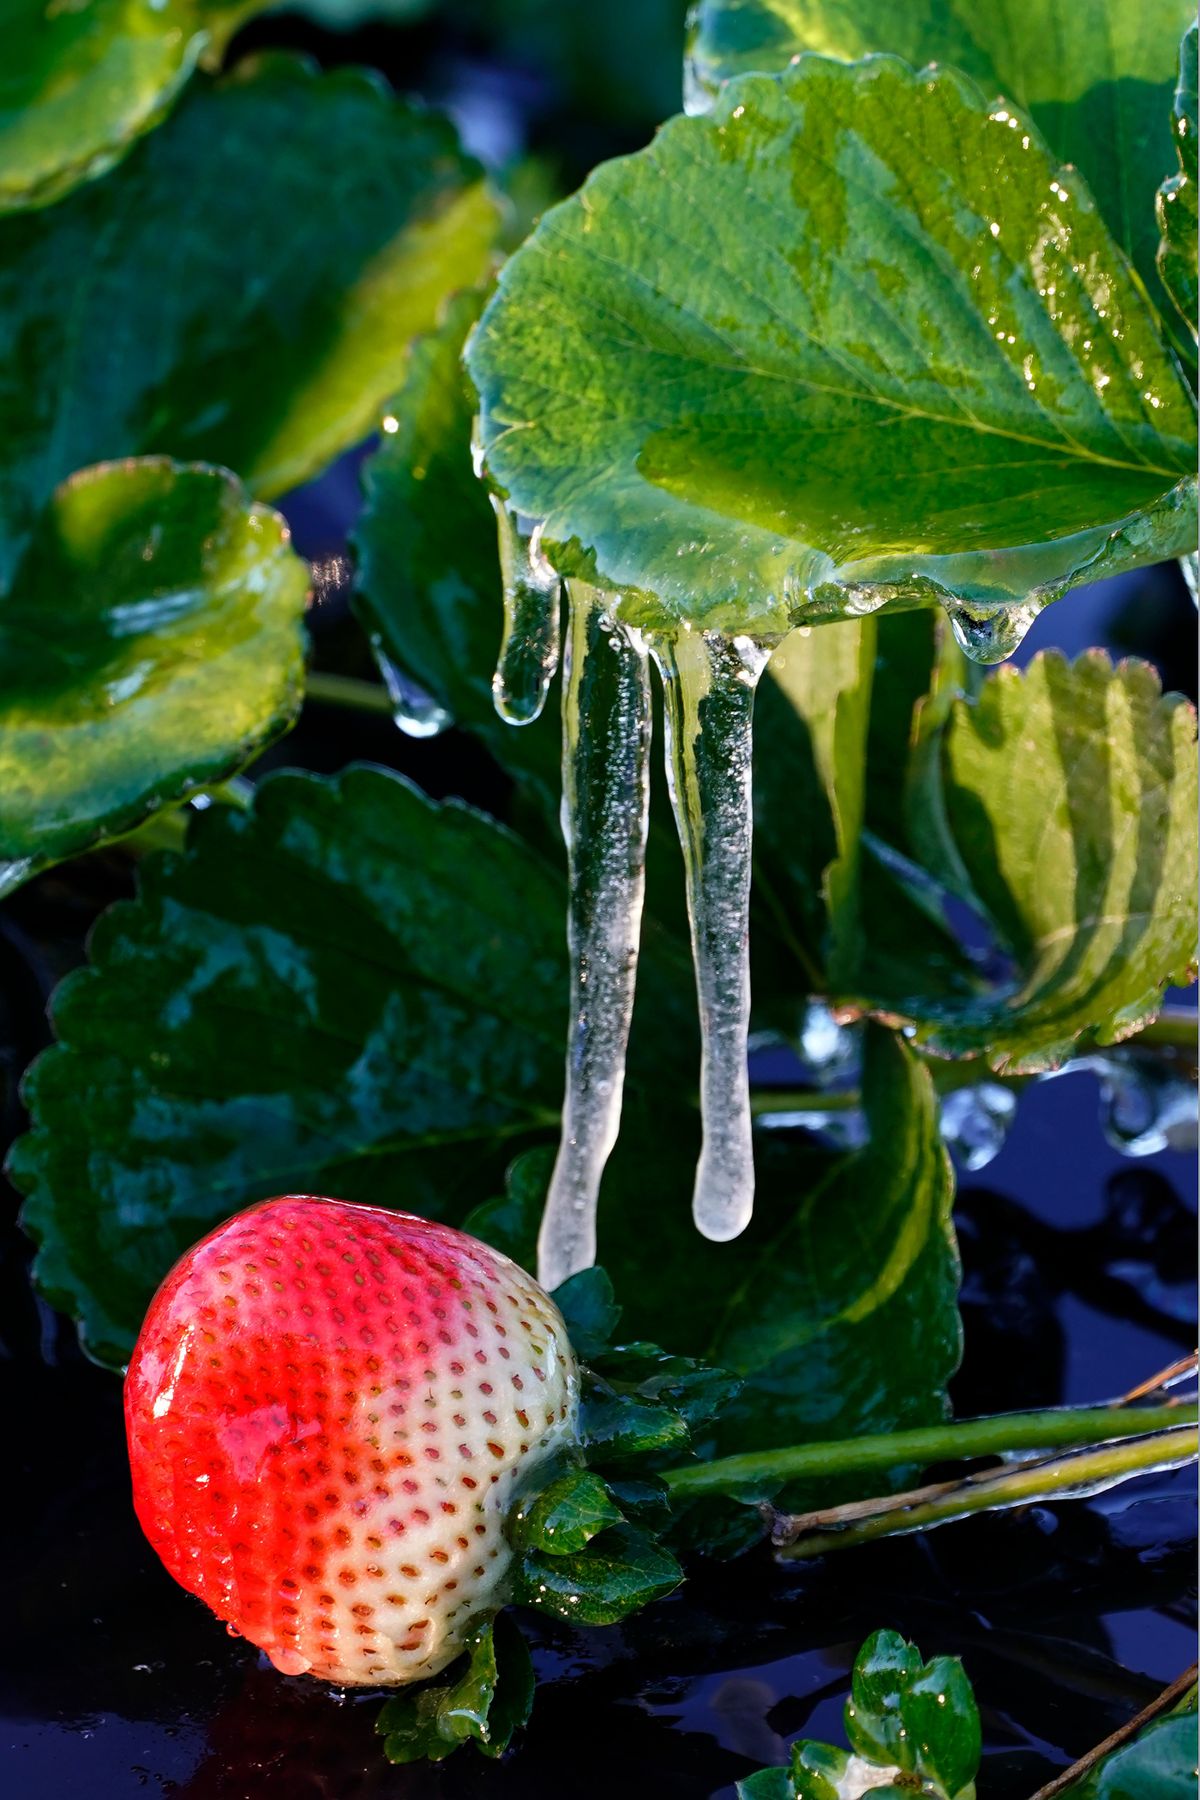 Ice clings to a strawberry in a field Sunday, Jan. 30, 2022, in Plant City, Fla. Farmers spray water on their crops to help keep the fruit from getting damaged by the cold. Temperatures overnight dipped into the mid-20